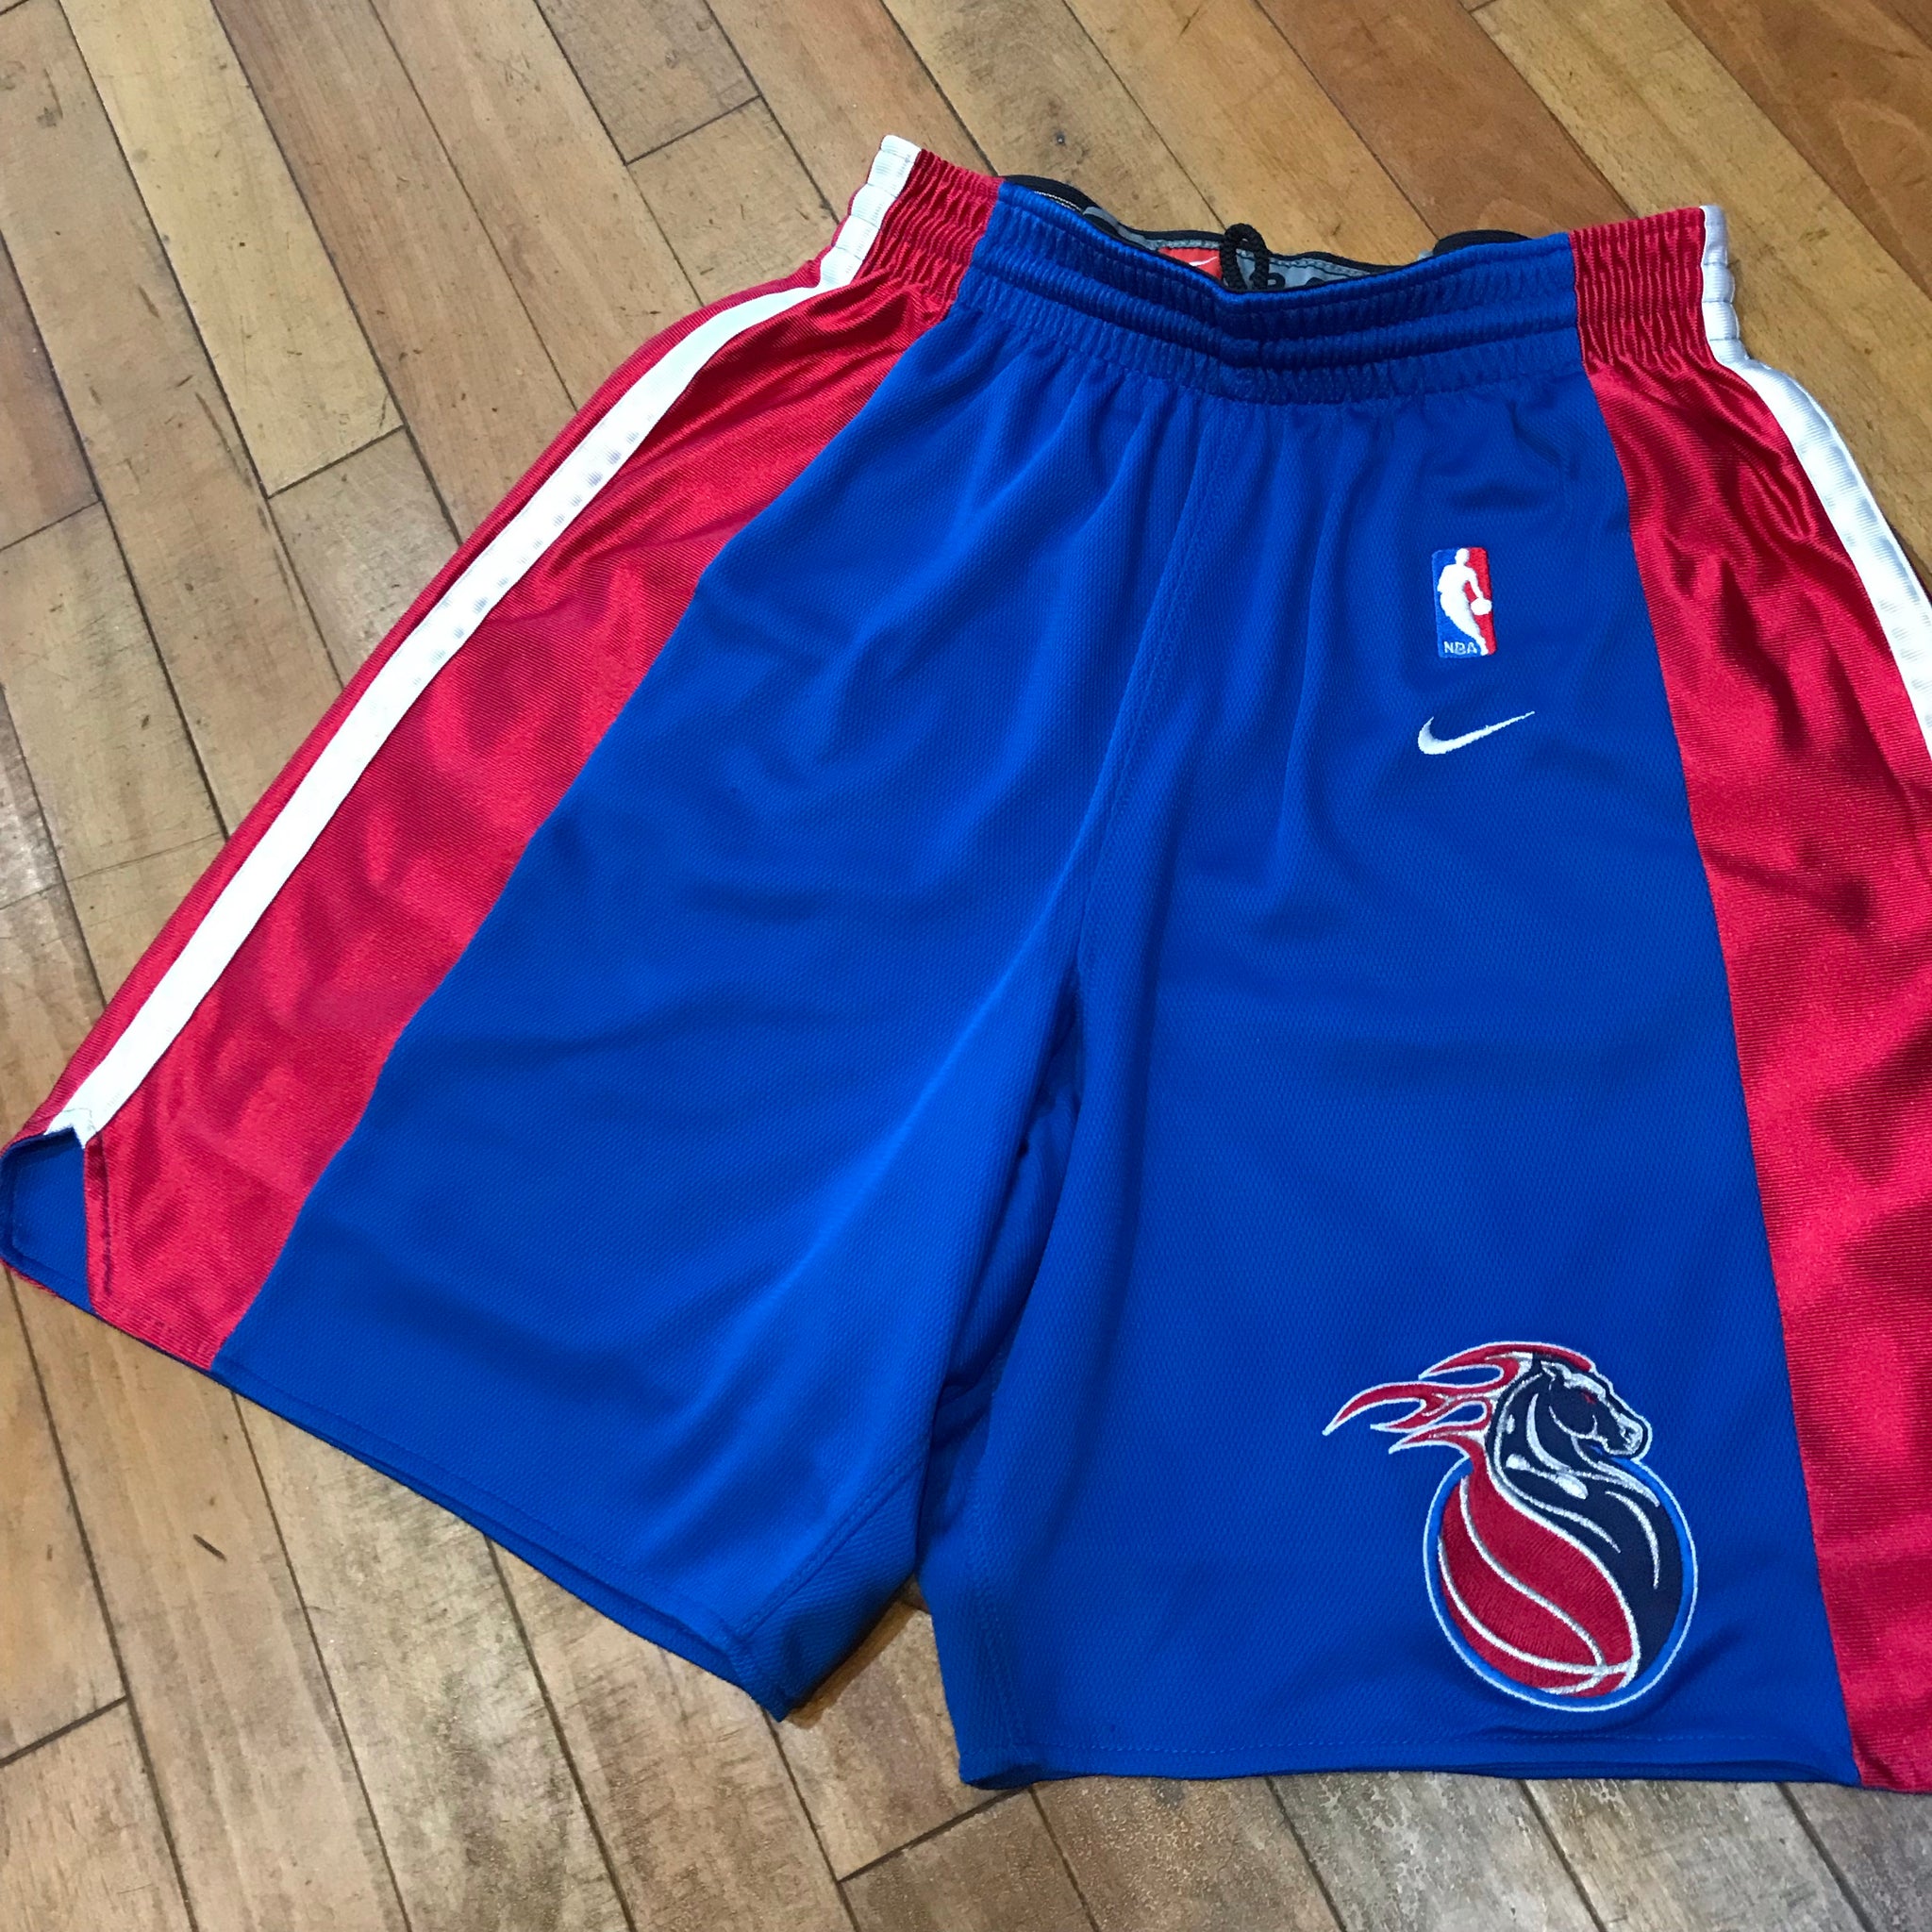 1993-1994 NBA Detroit Pistons Game Issue Basketball Shorts